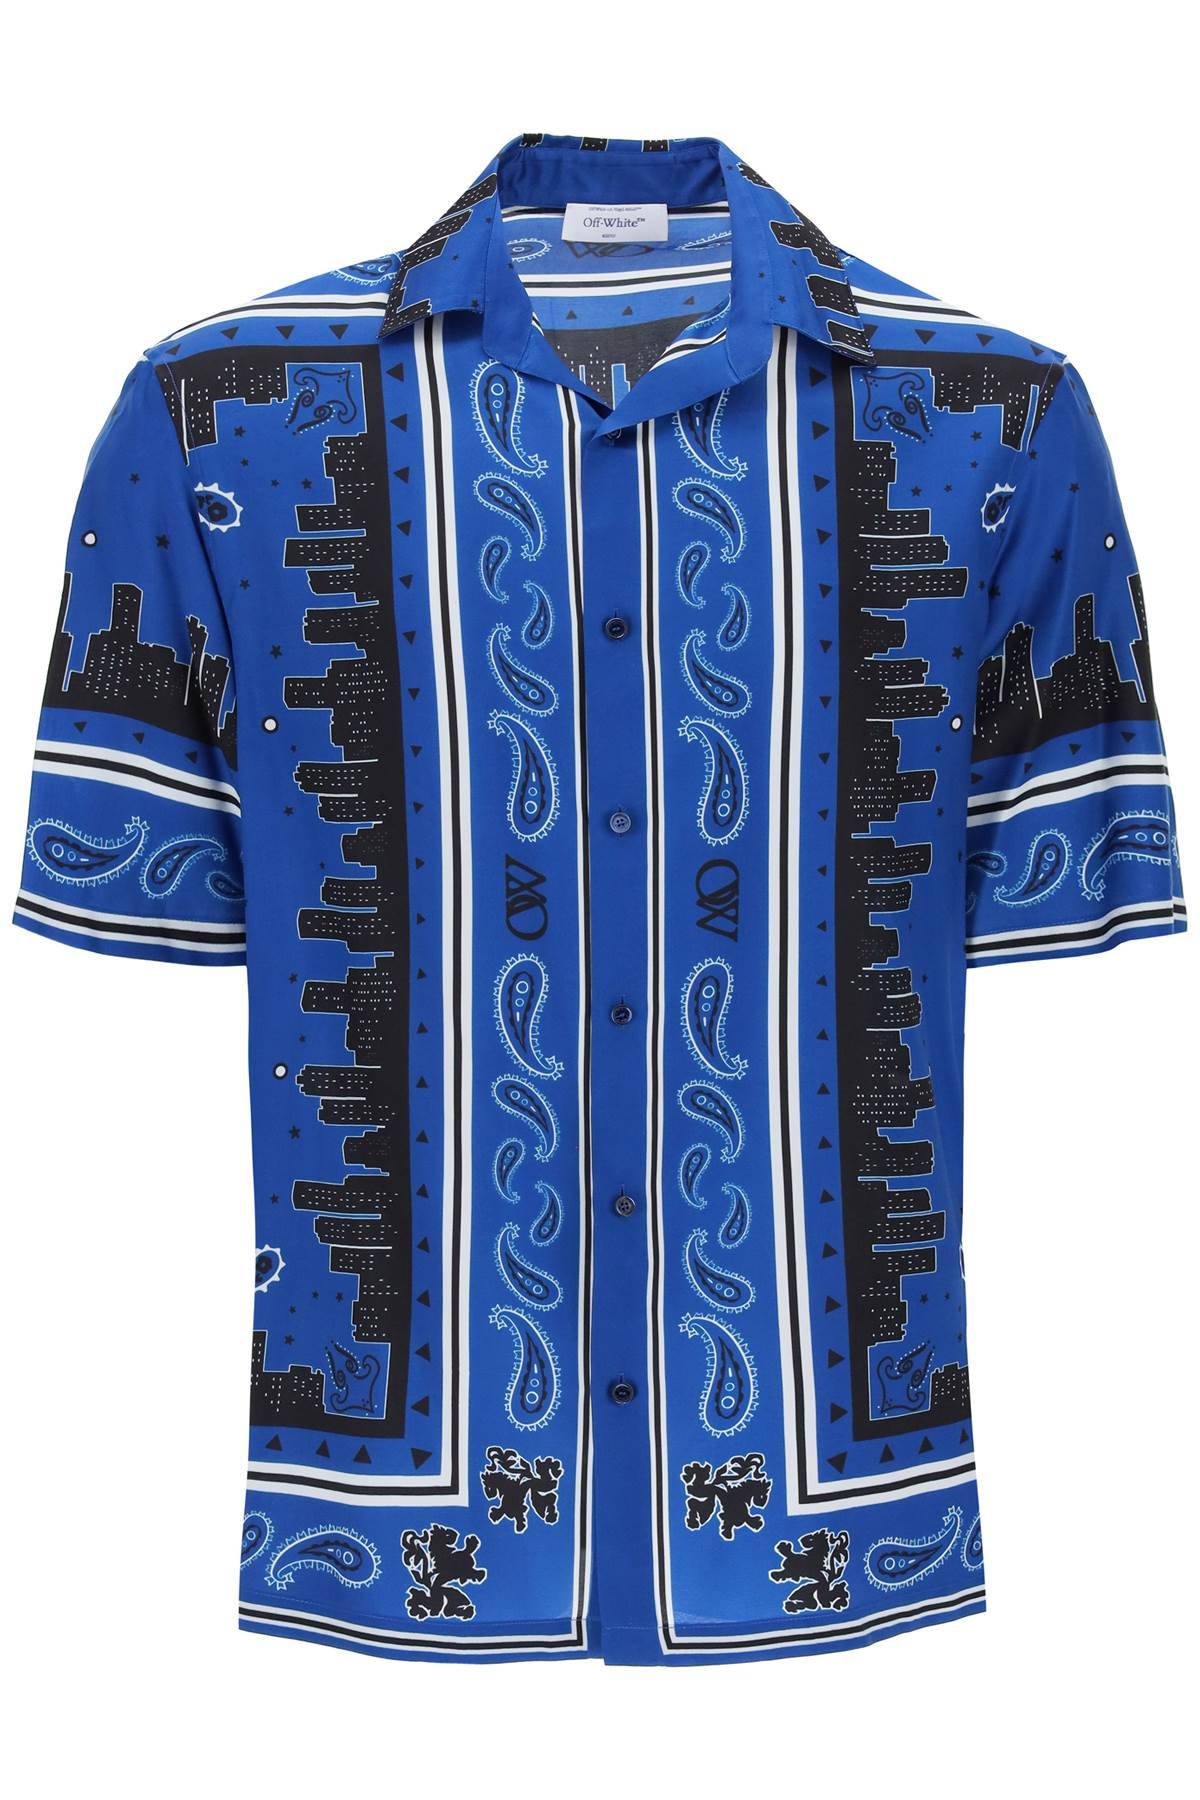 OFF-WHITE OFF-WHITE skyline paisley bowling shirt with pattern